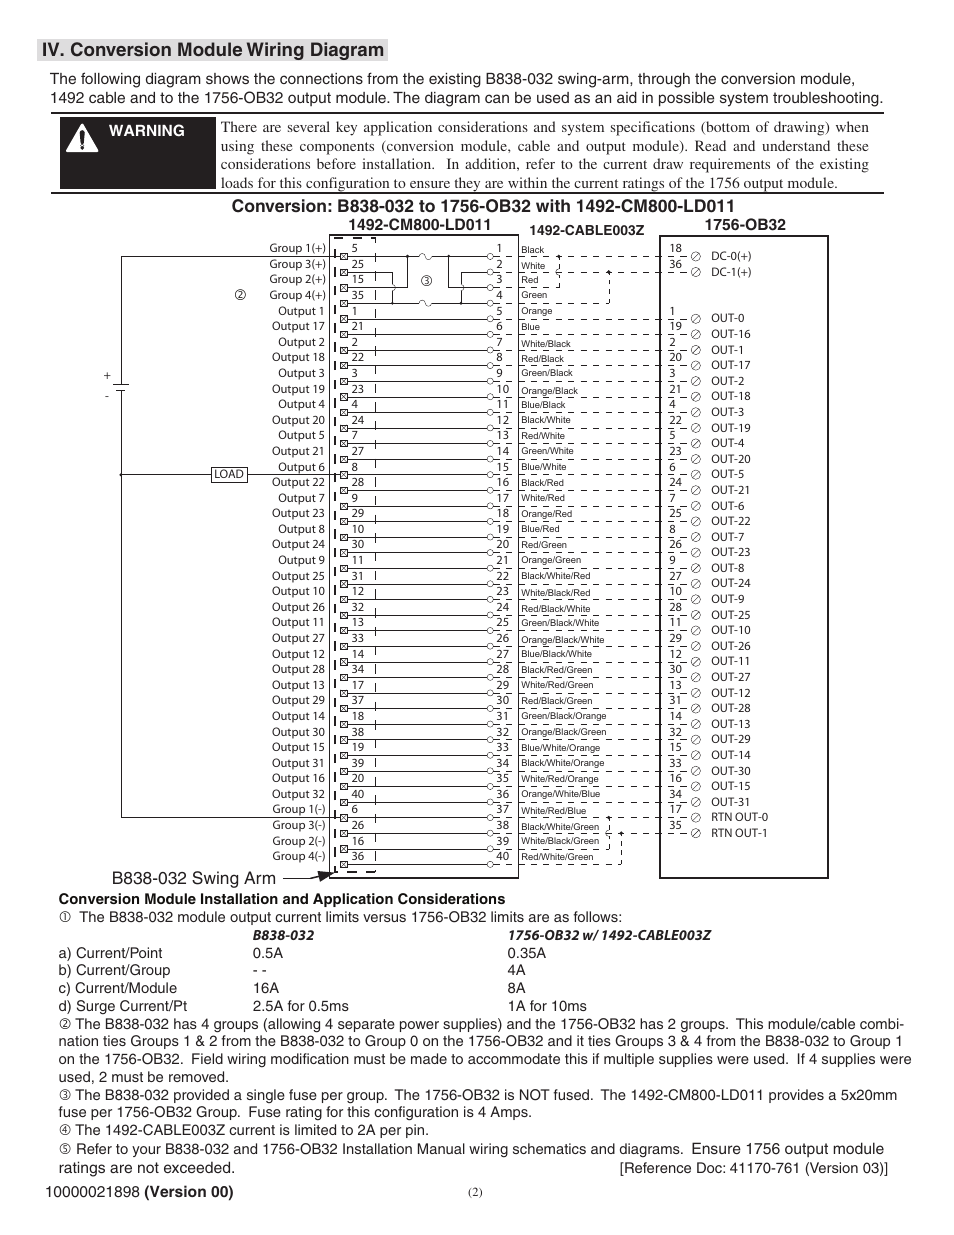 Iv. conversion module wiring diagram | Rockwell Automation 1492-CM800-LD011 Field Wire Conv. Module for Modicon B838-032 to 1756-OB32 User Manual | Page 2 / 6